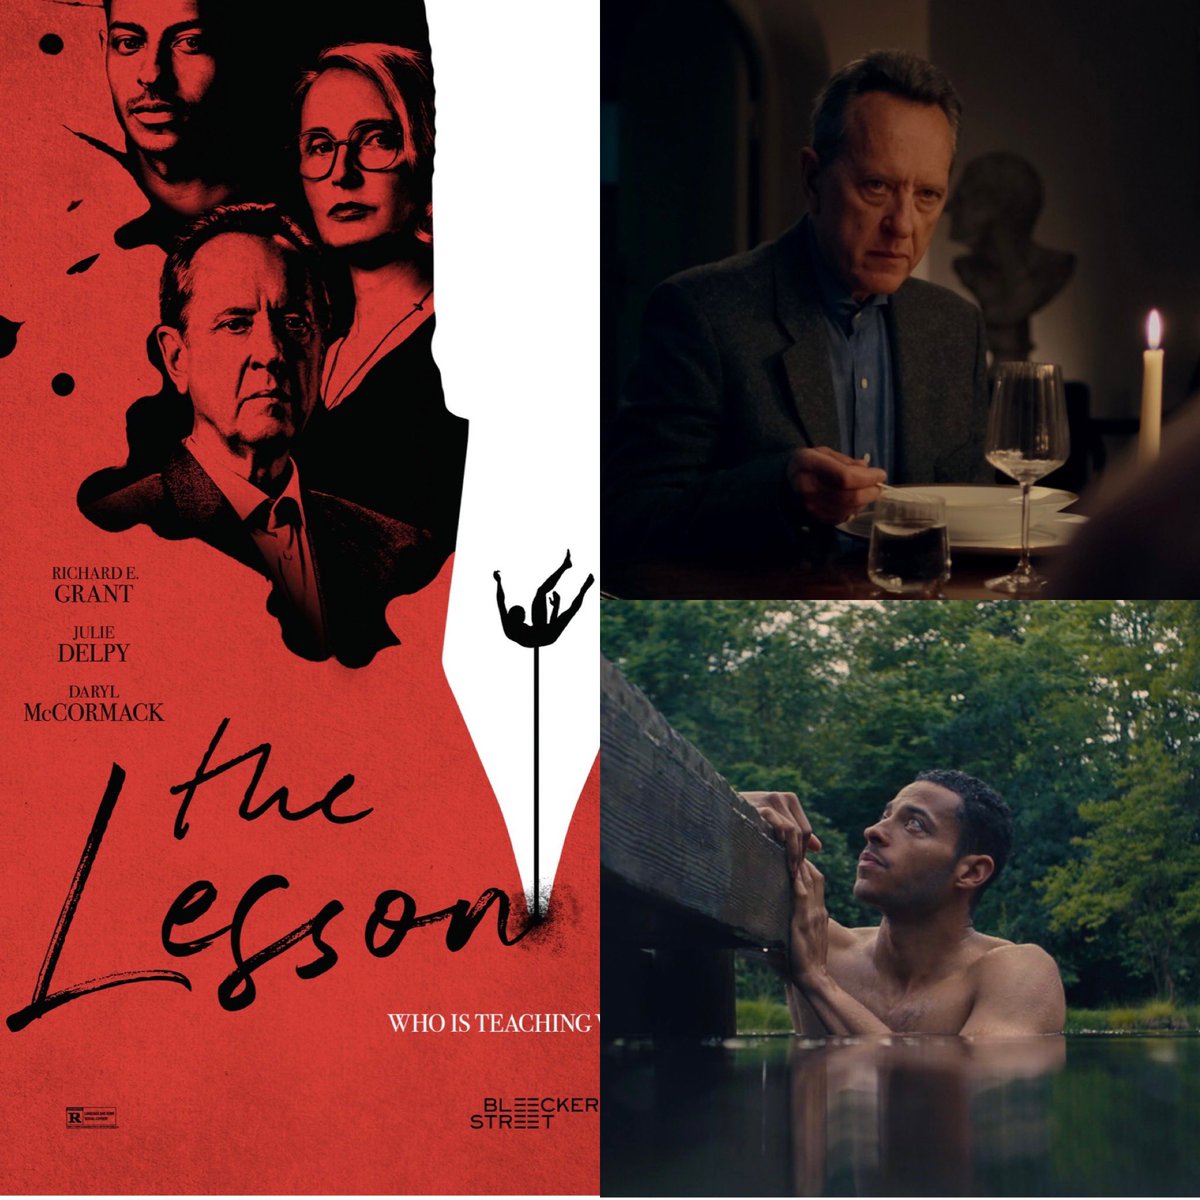 THE LESSON is now available to buy starring @DarylMcCormack & Julie Delpy upcg.link/TheLesson